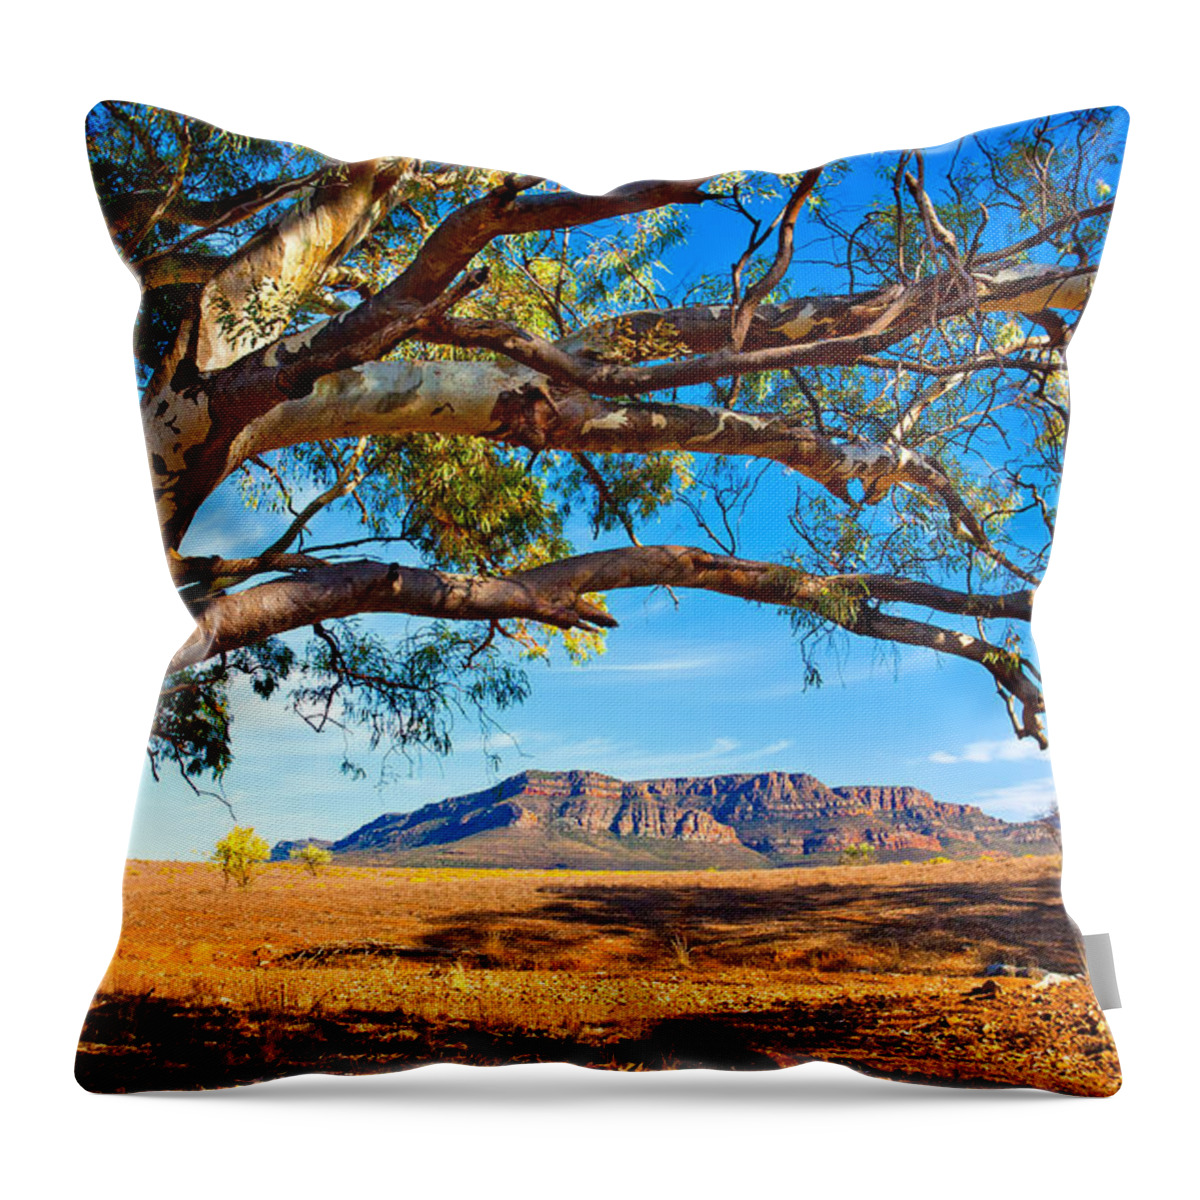 Wilpena Pound Flinders Ranges South Australia Outback Landscape Throw Pillow featuring the photograph Wilpena Pound by Bill Robinson